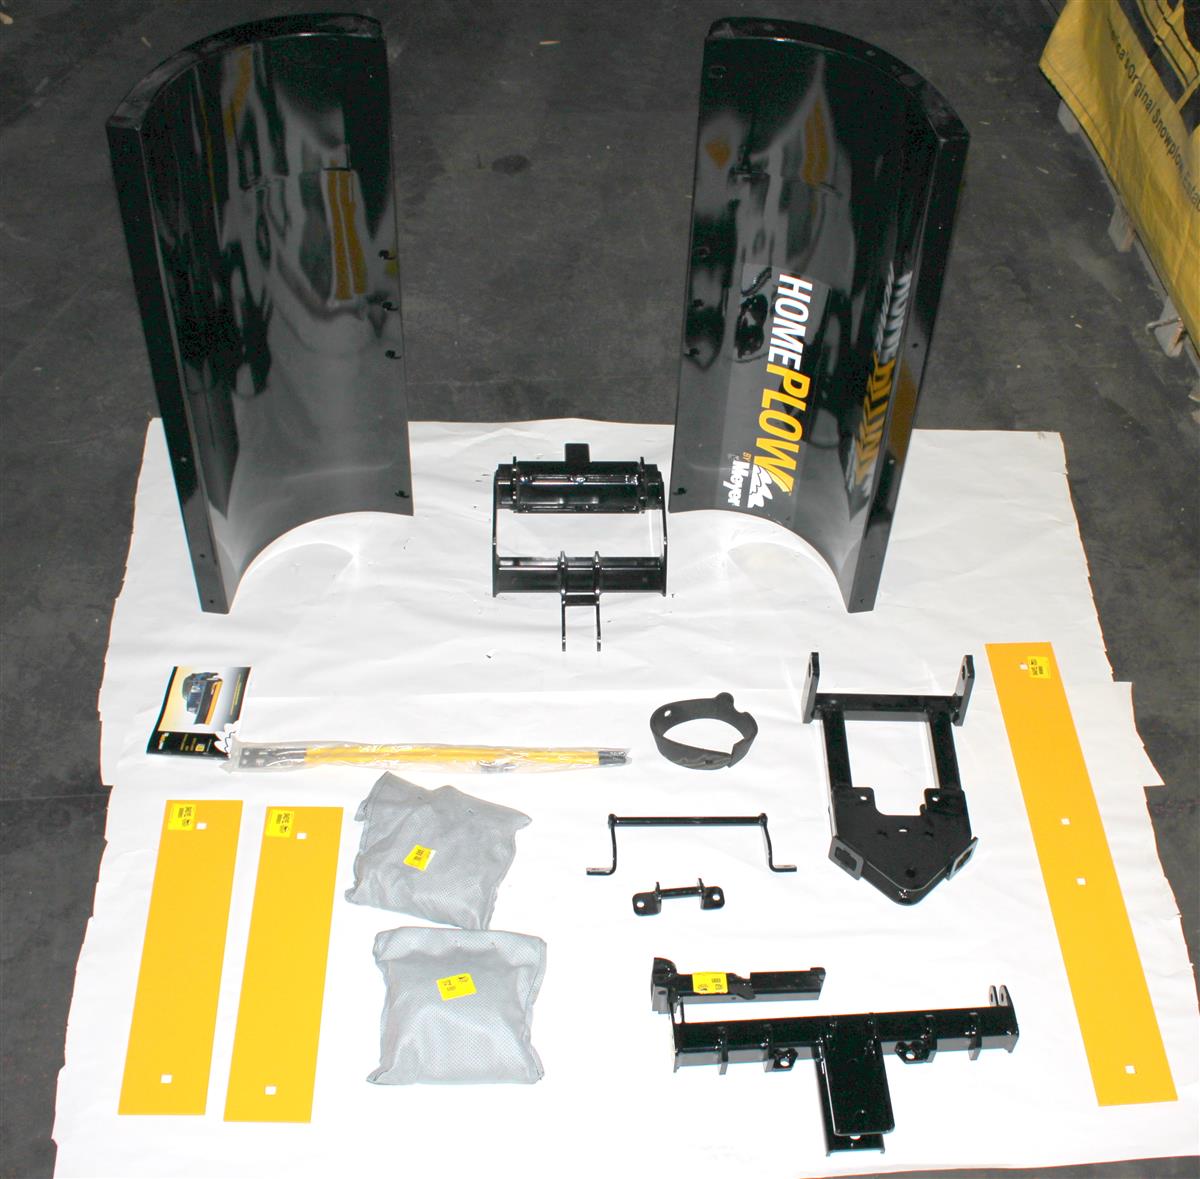 SNOW-068 | SNOW-068 Meyer Home Plow HP 6.8 2PC Manual Lift Engine Package Kit with Blades Meyer Sn (9).JPG